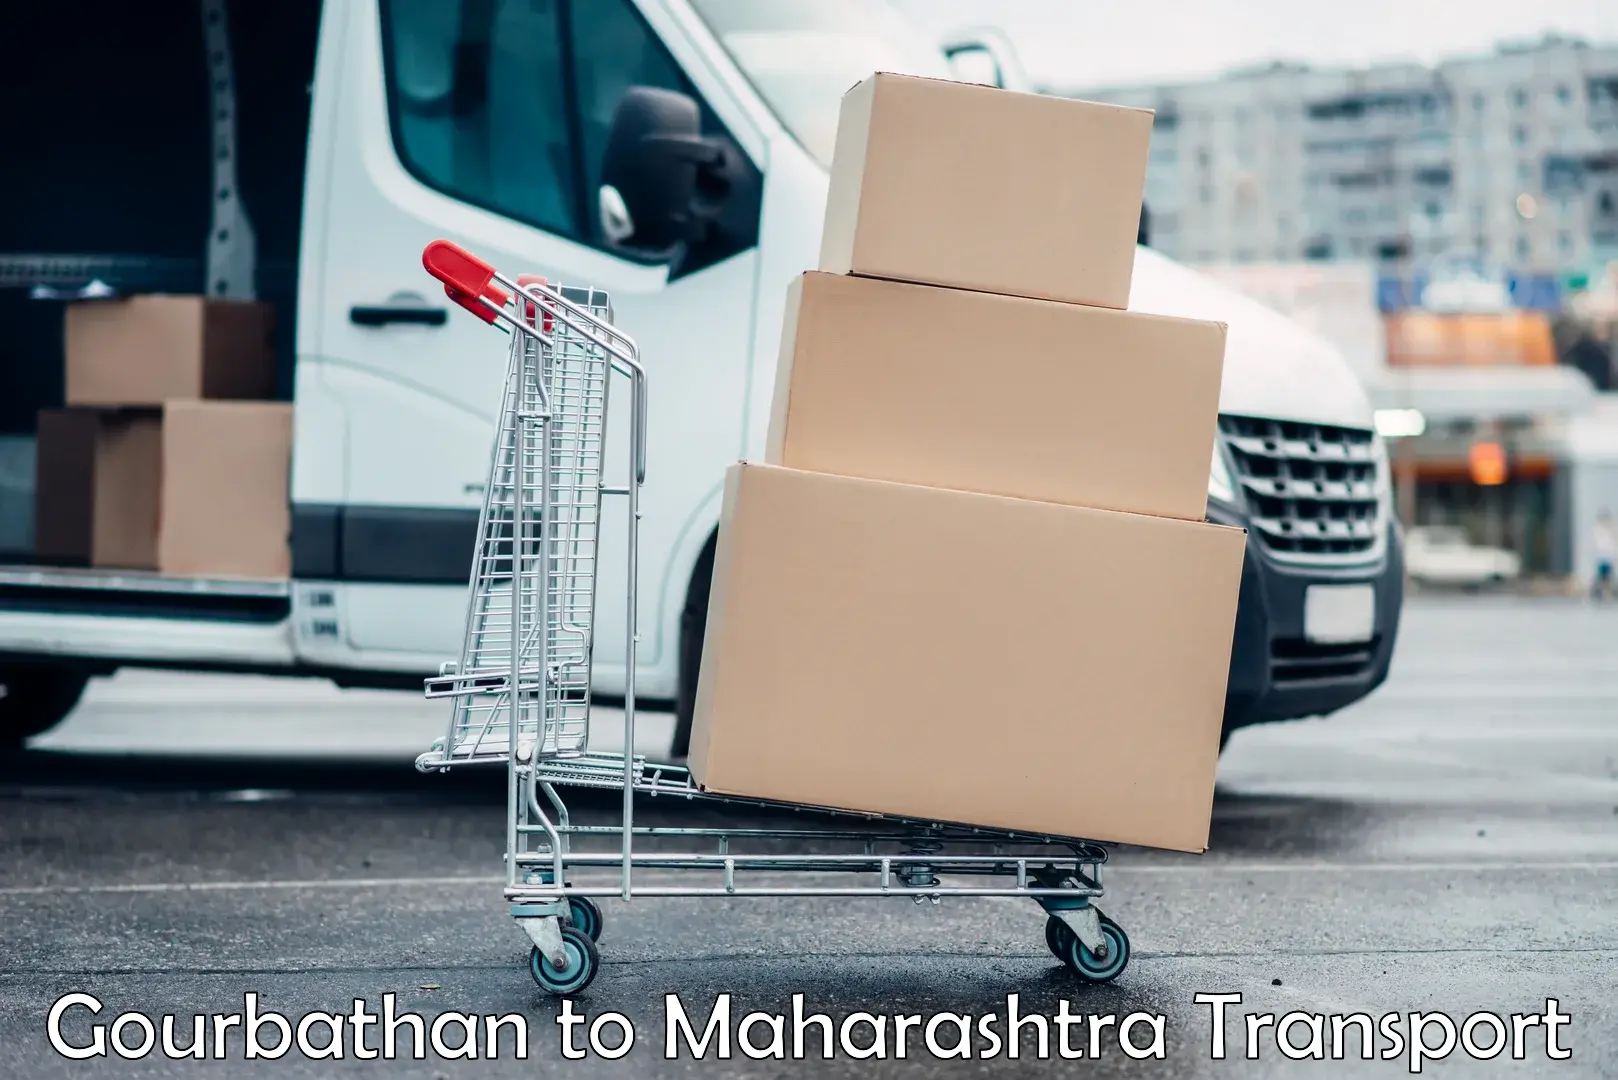 Online transport service Gourbathan to Vadgaon